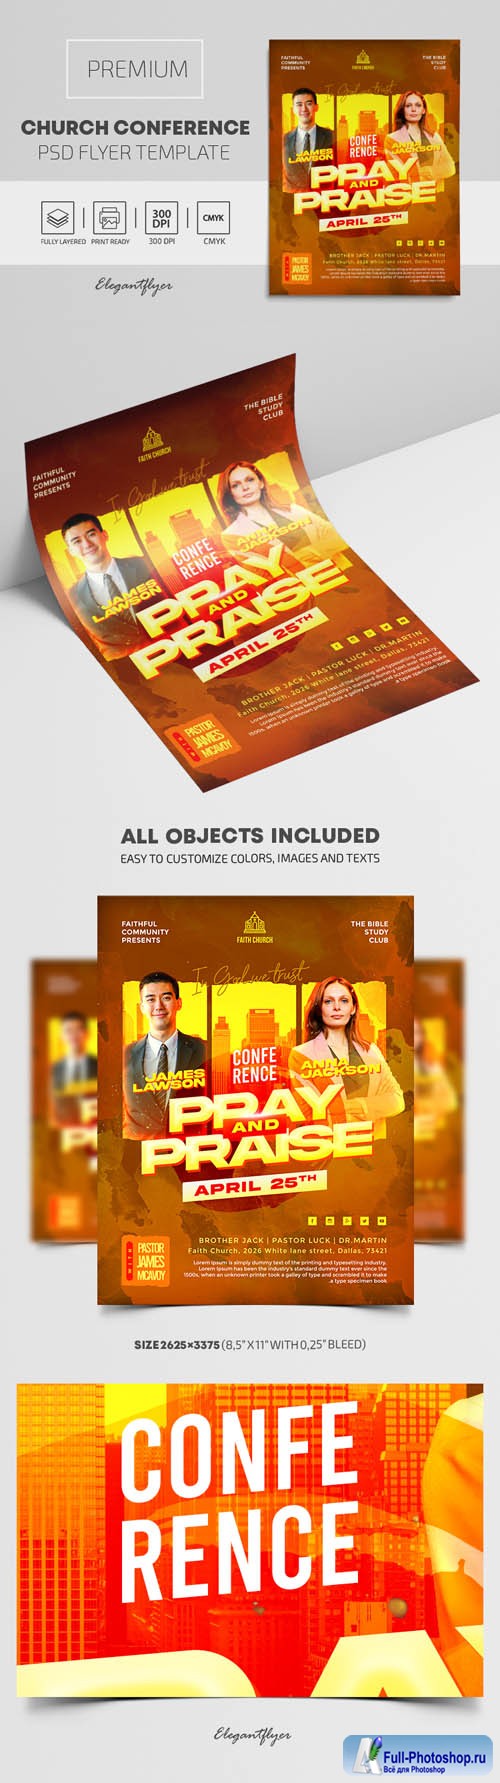 Church Conference Premium PSD Flyer Template